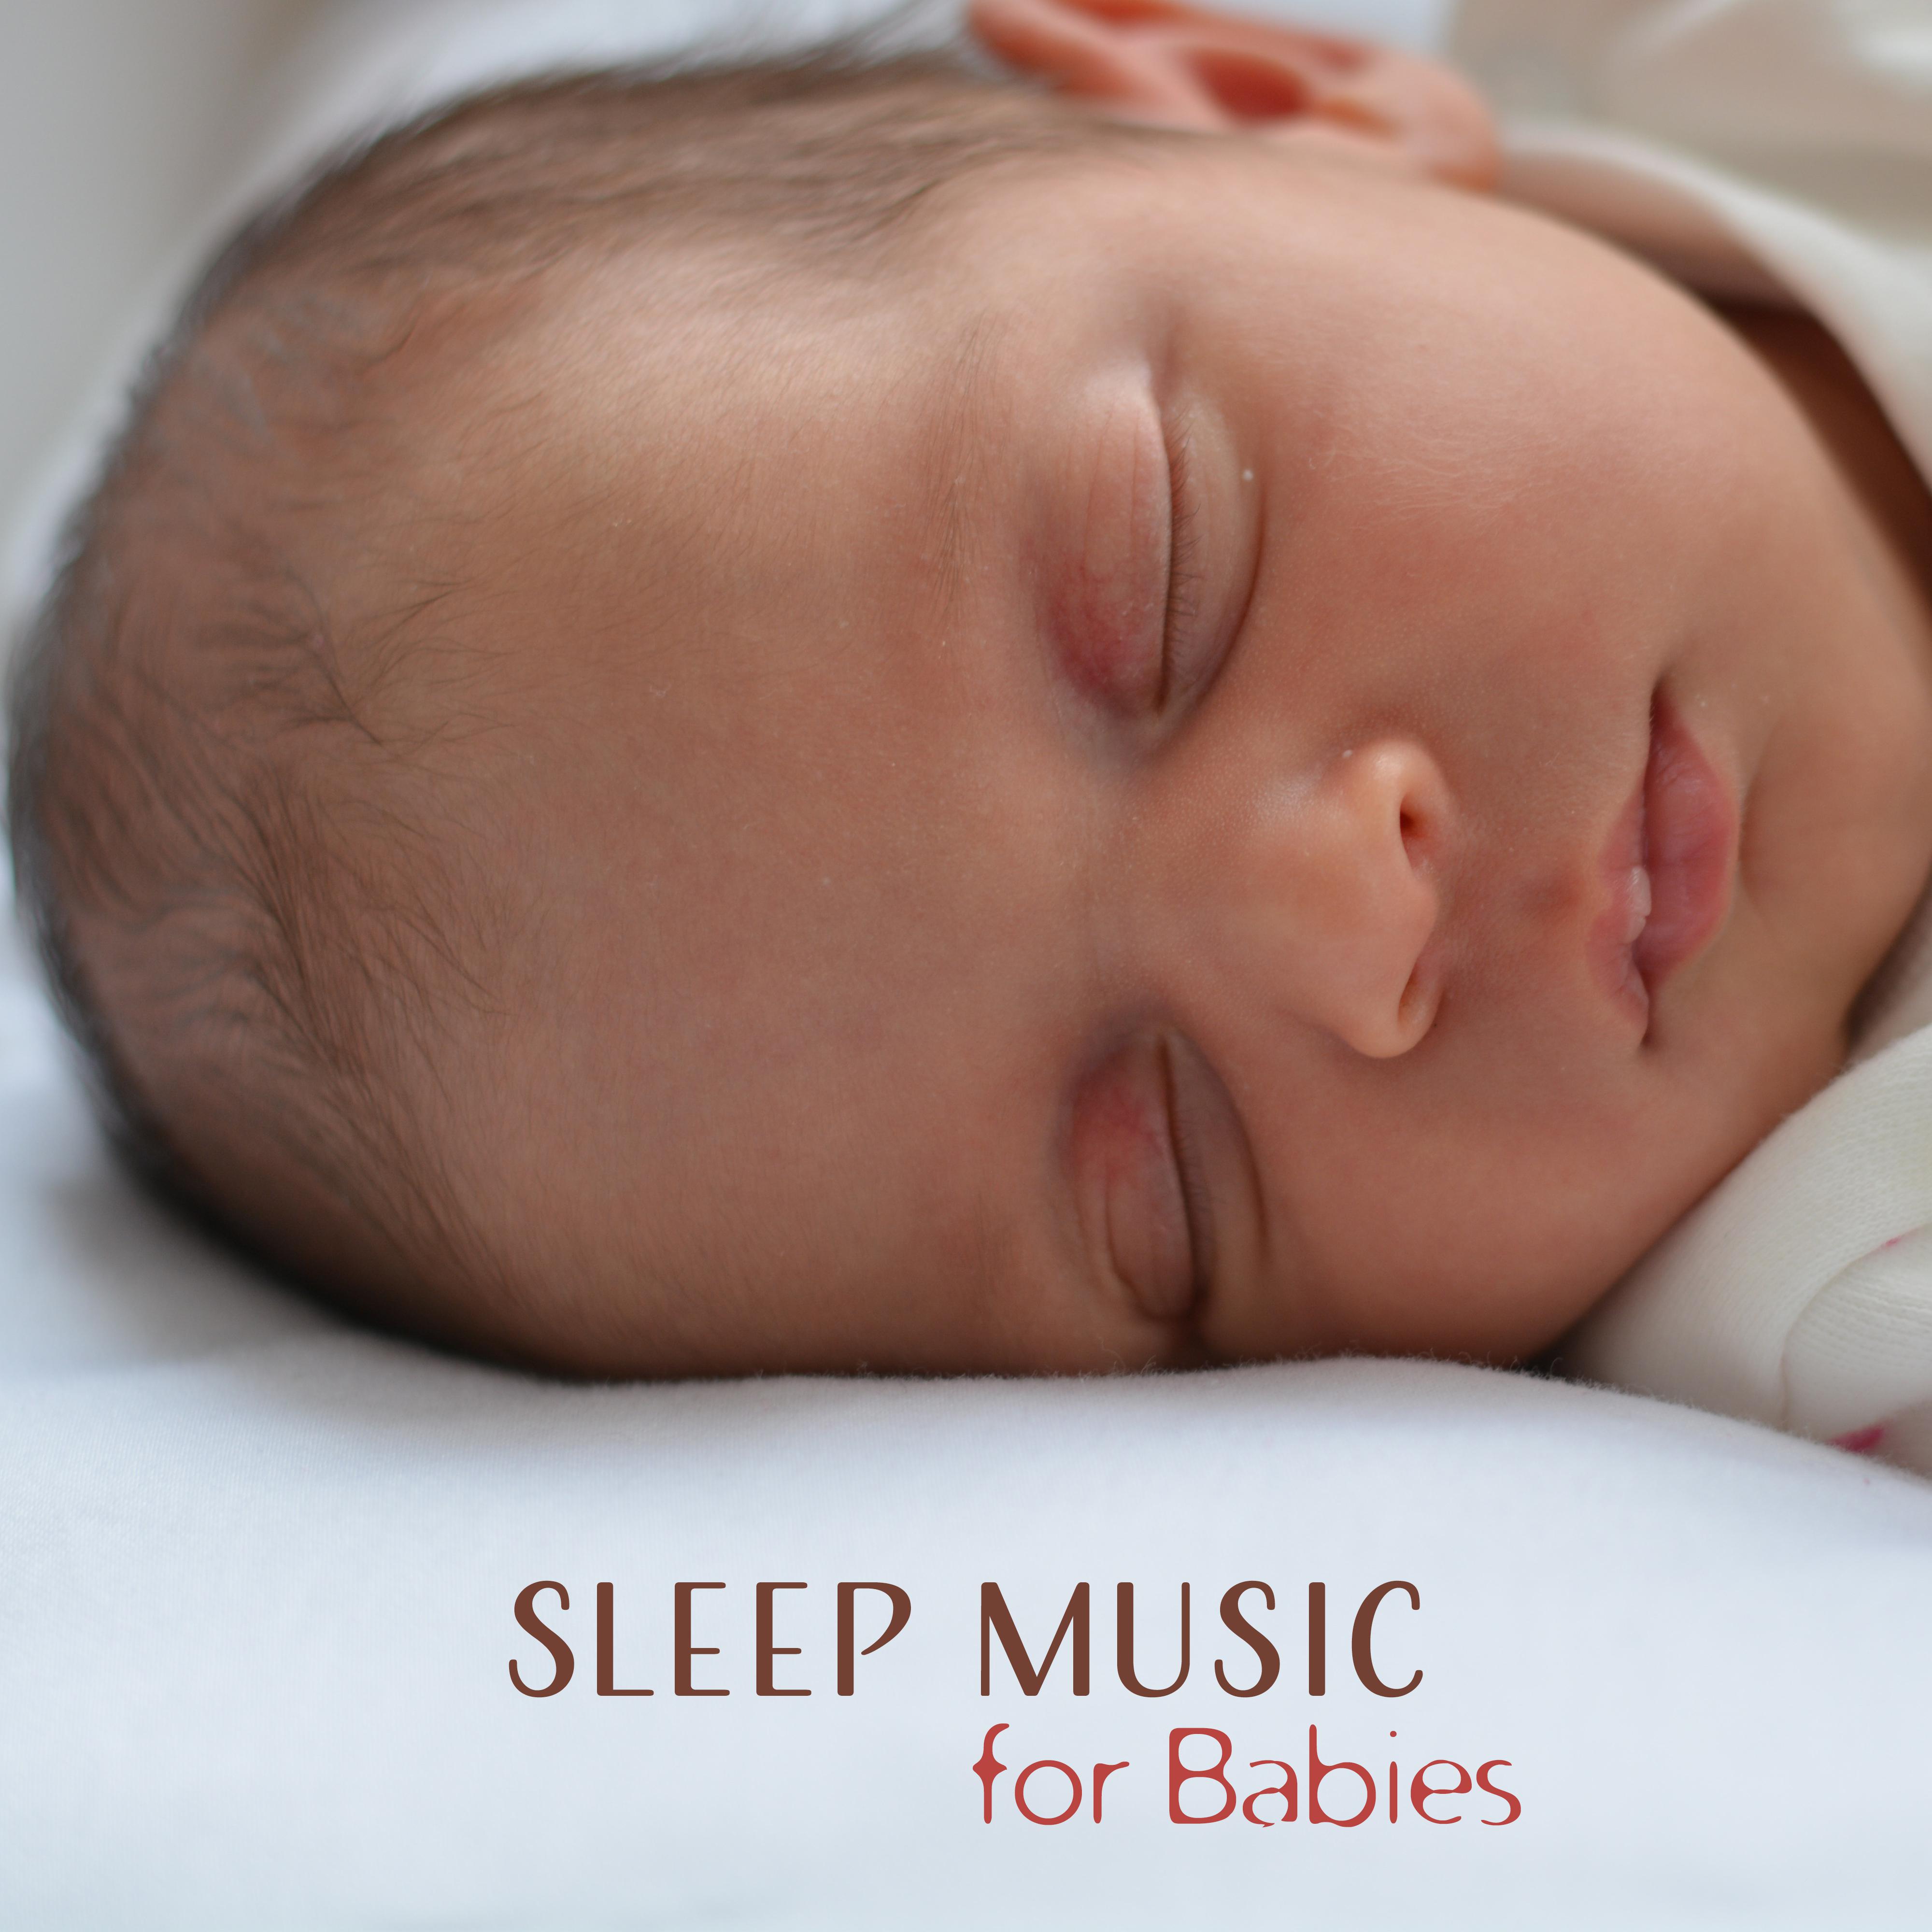 Sleep Music for Babies – Relaxing Music for Sweet Toddlers, Babies Music, Music for Children